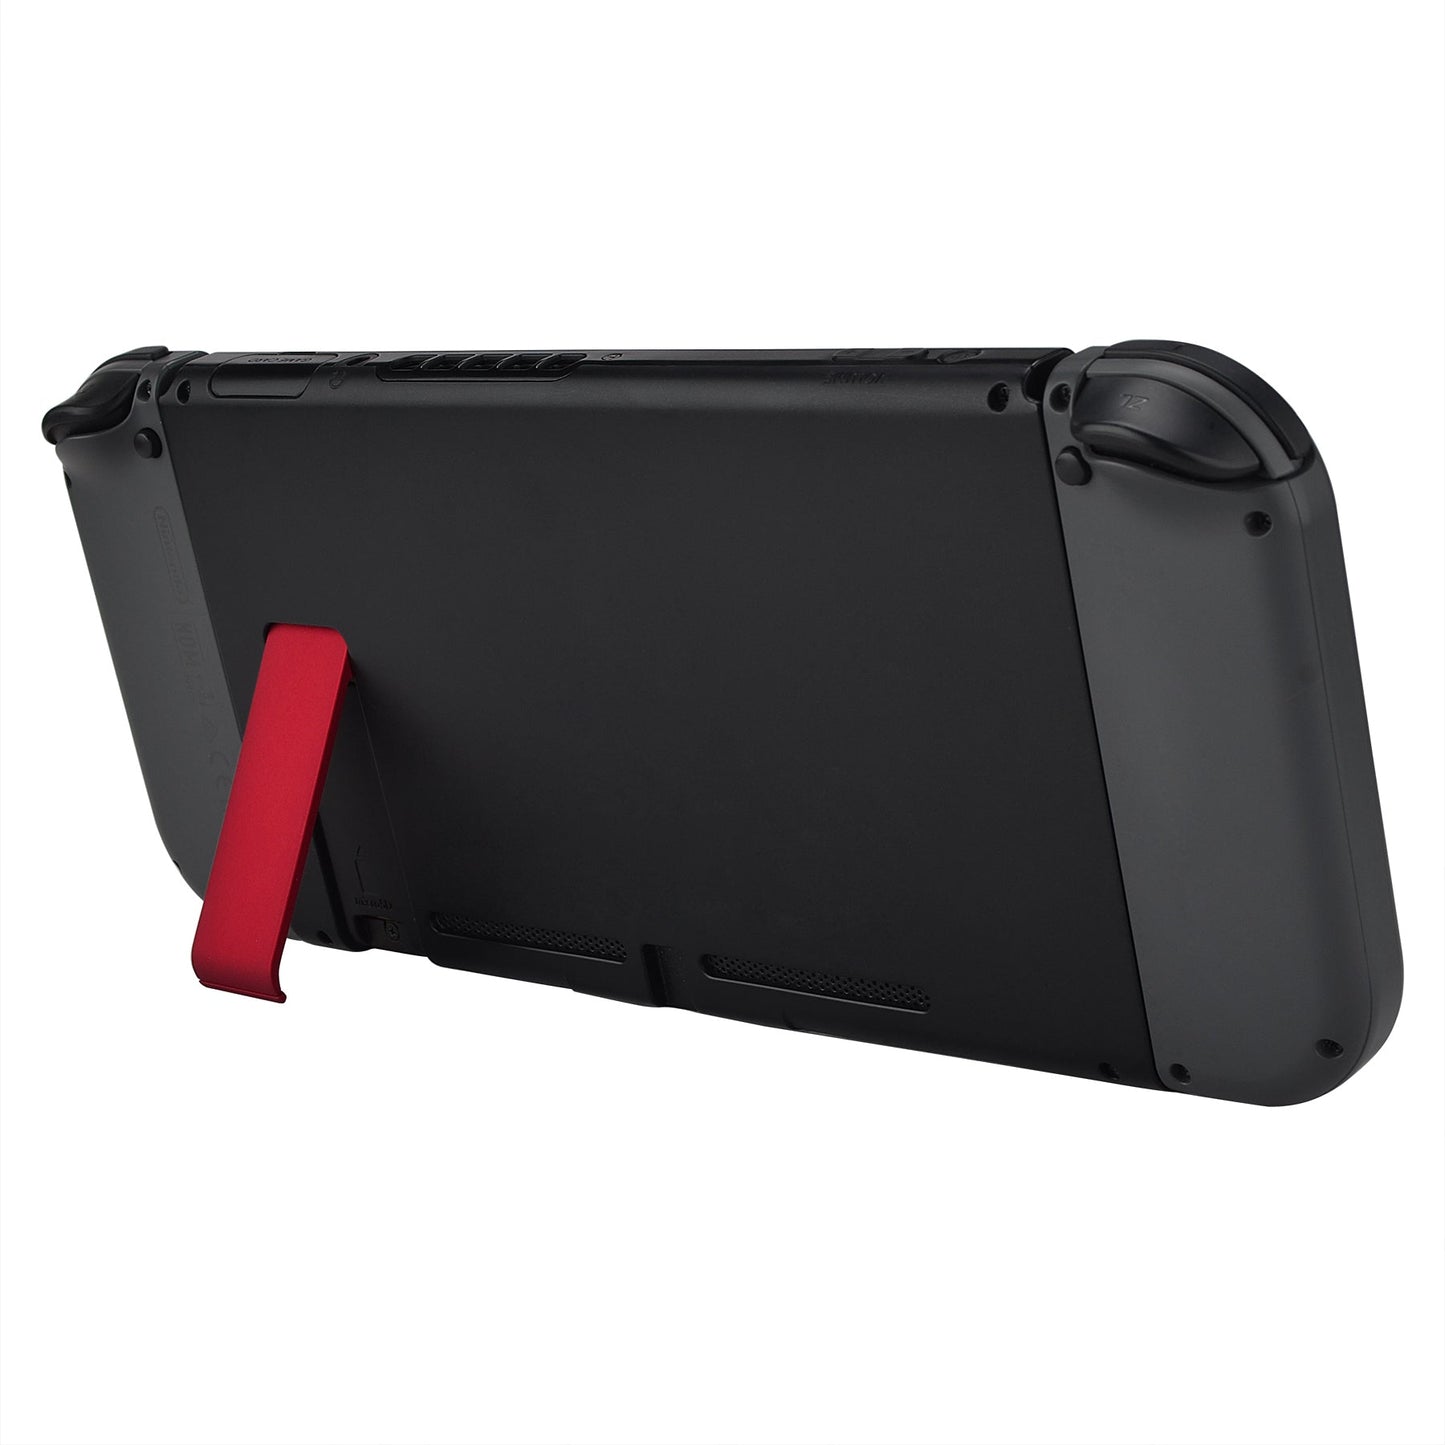 eXtremeRate Retail 2 Set of Red Replacement Kickstand for Nintendo Switch Console, Back Bracket Holder Kick Stand for Nintendo Switch - Console NOT Included - AJ402